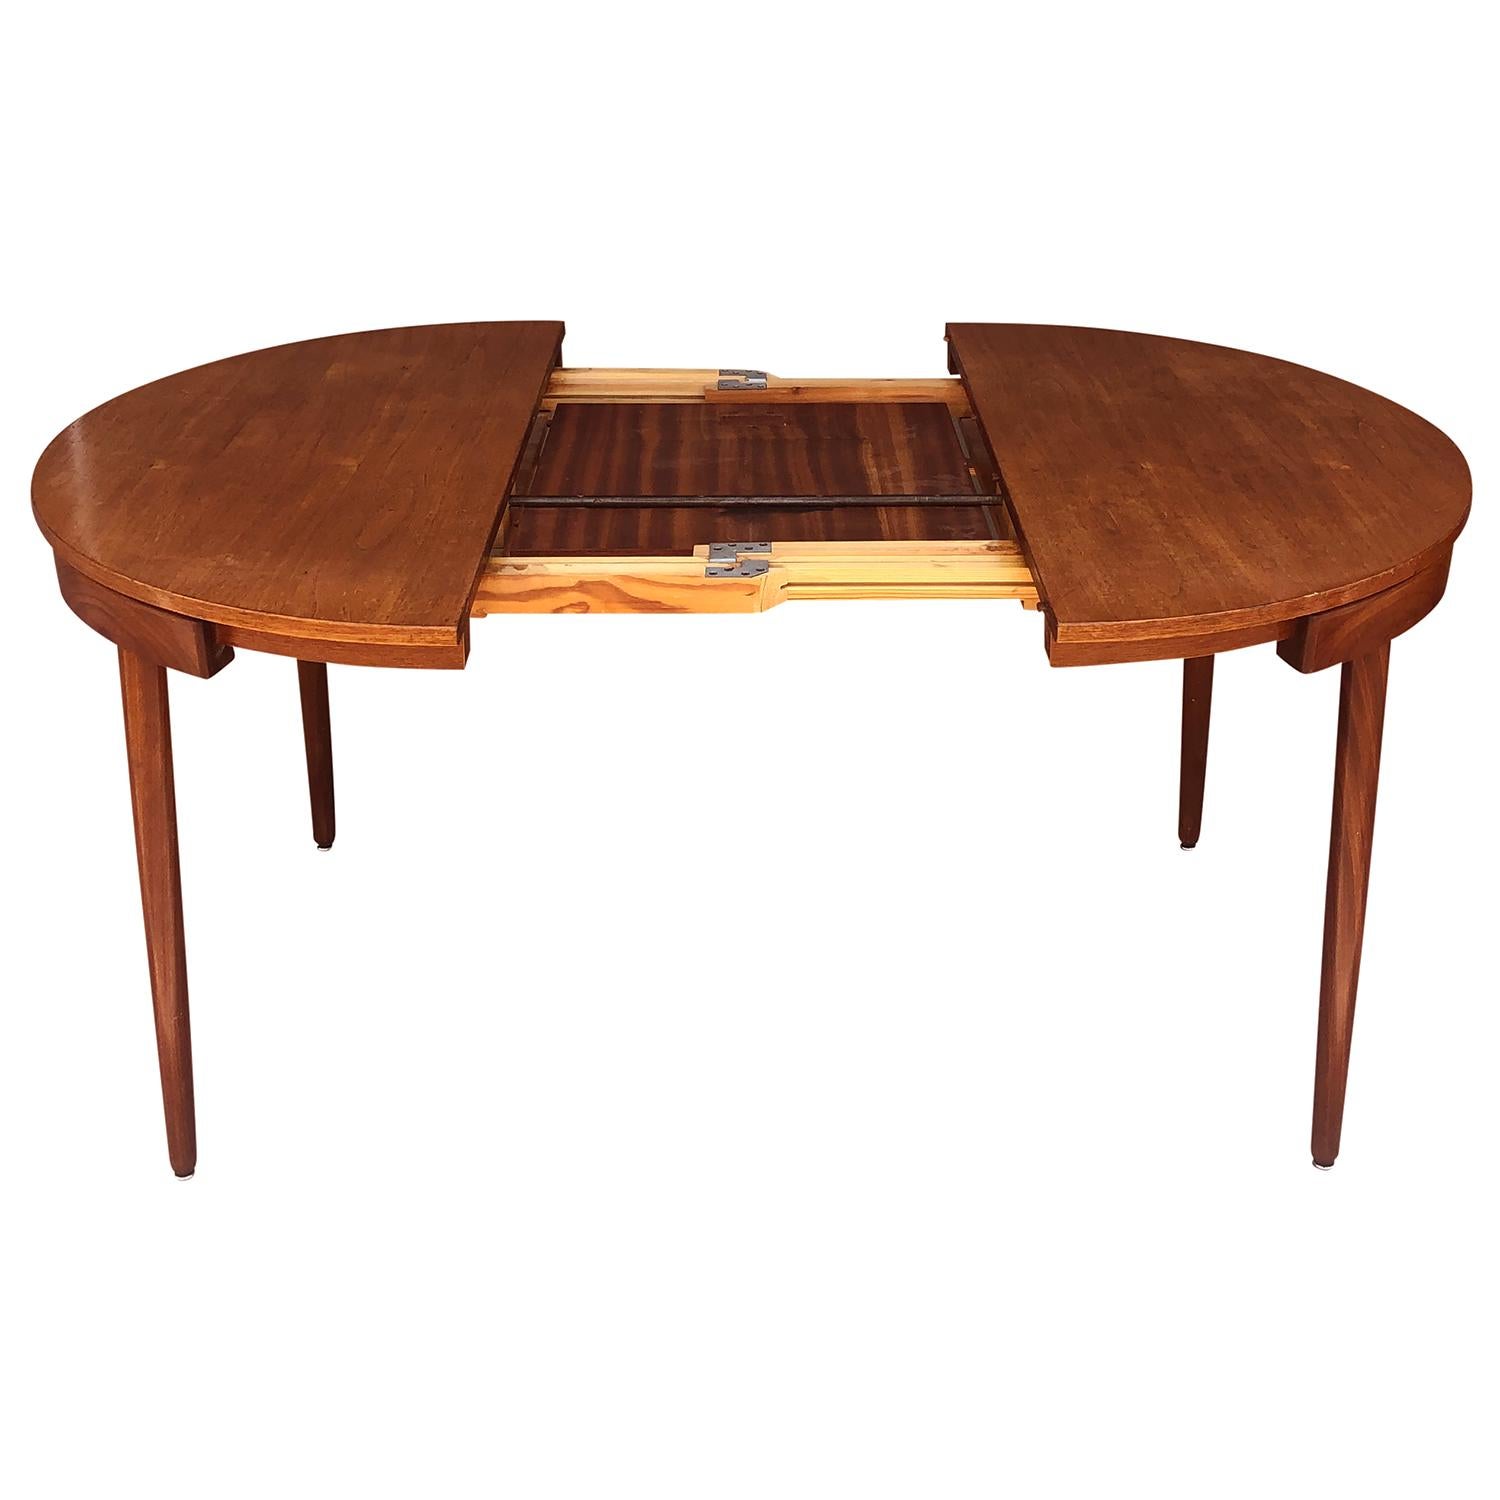 A unique Danish dining set made of walnut by Hans Olsen with four chairs which fully slide under the round table with only the backrests showing along the perimeter. Wear consistent with age and use, circa 1950–1960 Denmark, Scandinavia.
Chairs: